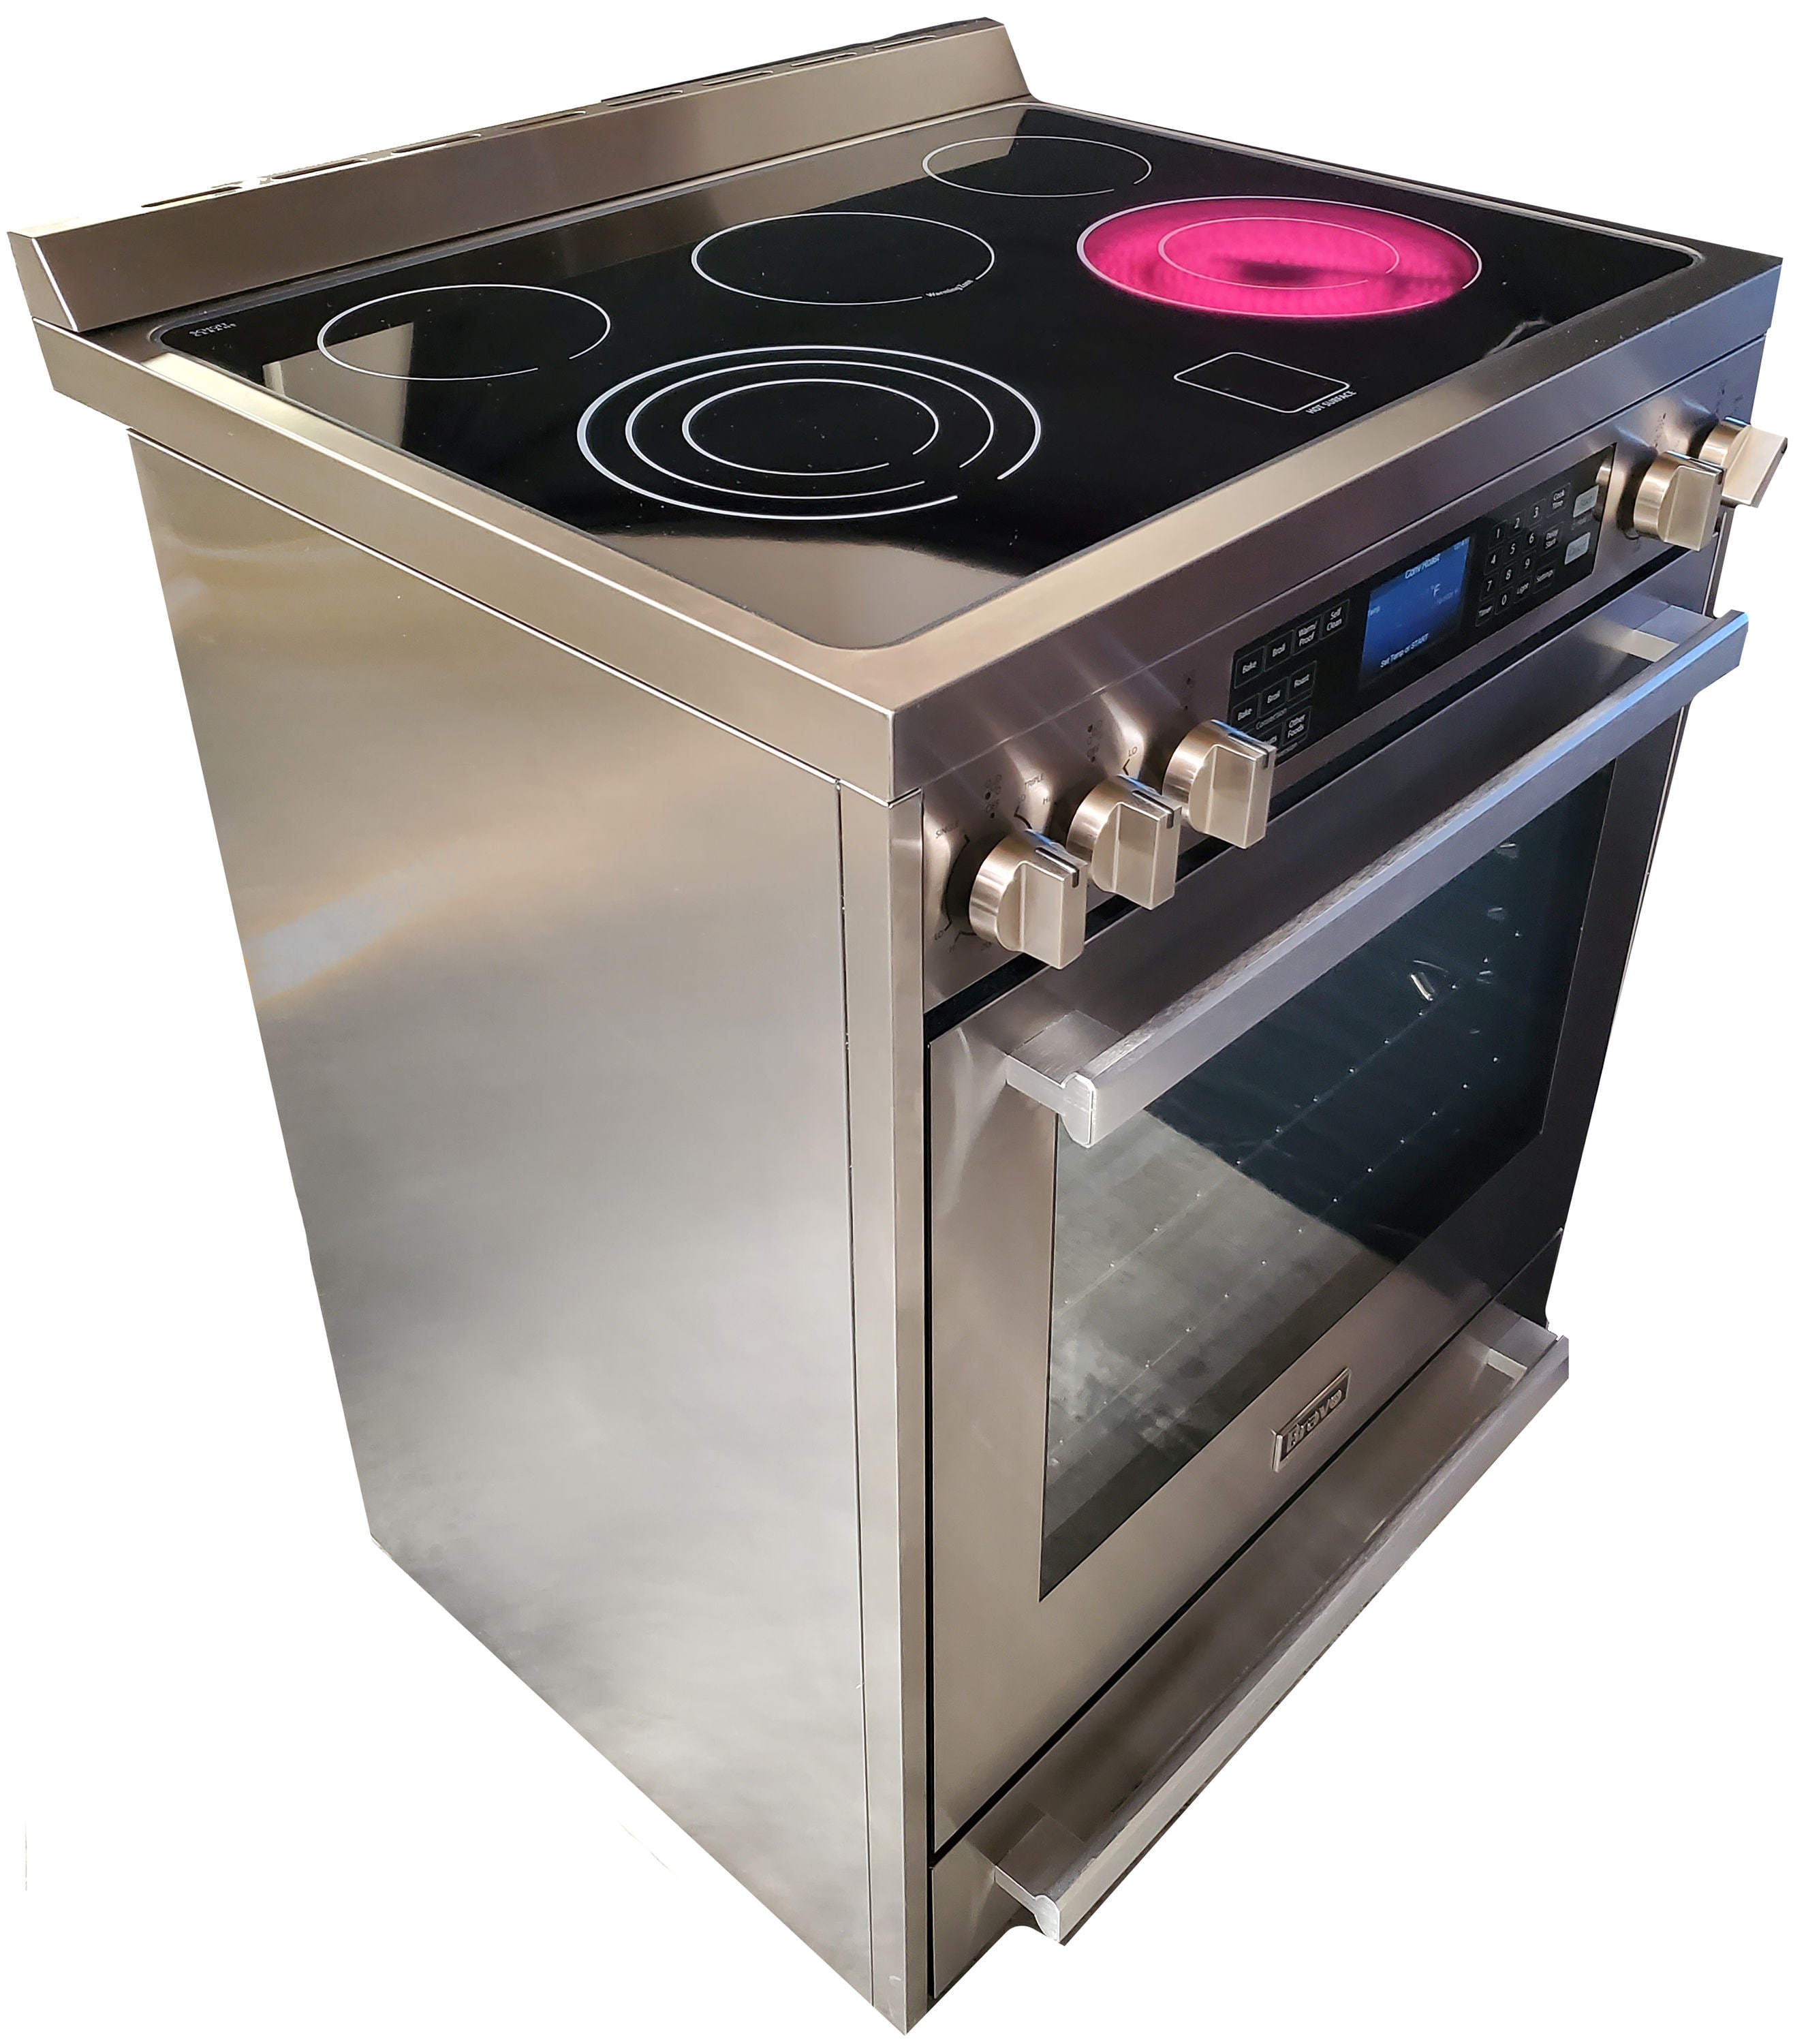 GE JD630STSS 30 Drop-In Electric Range - Stainless Steel